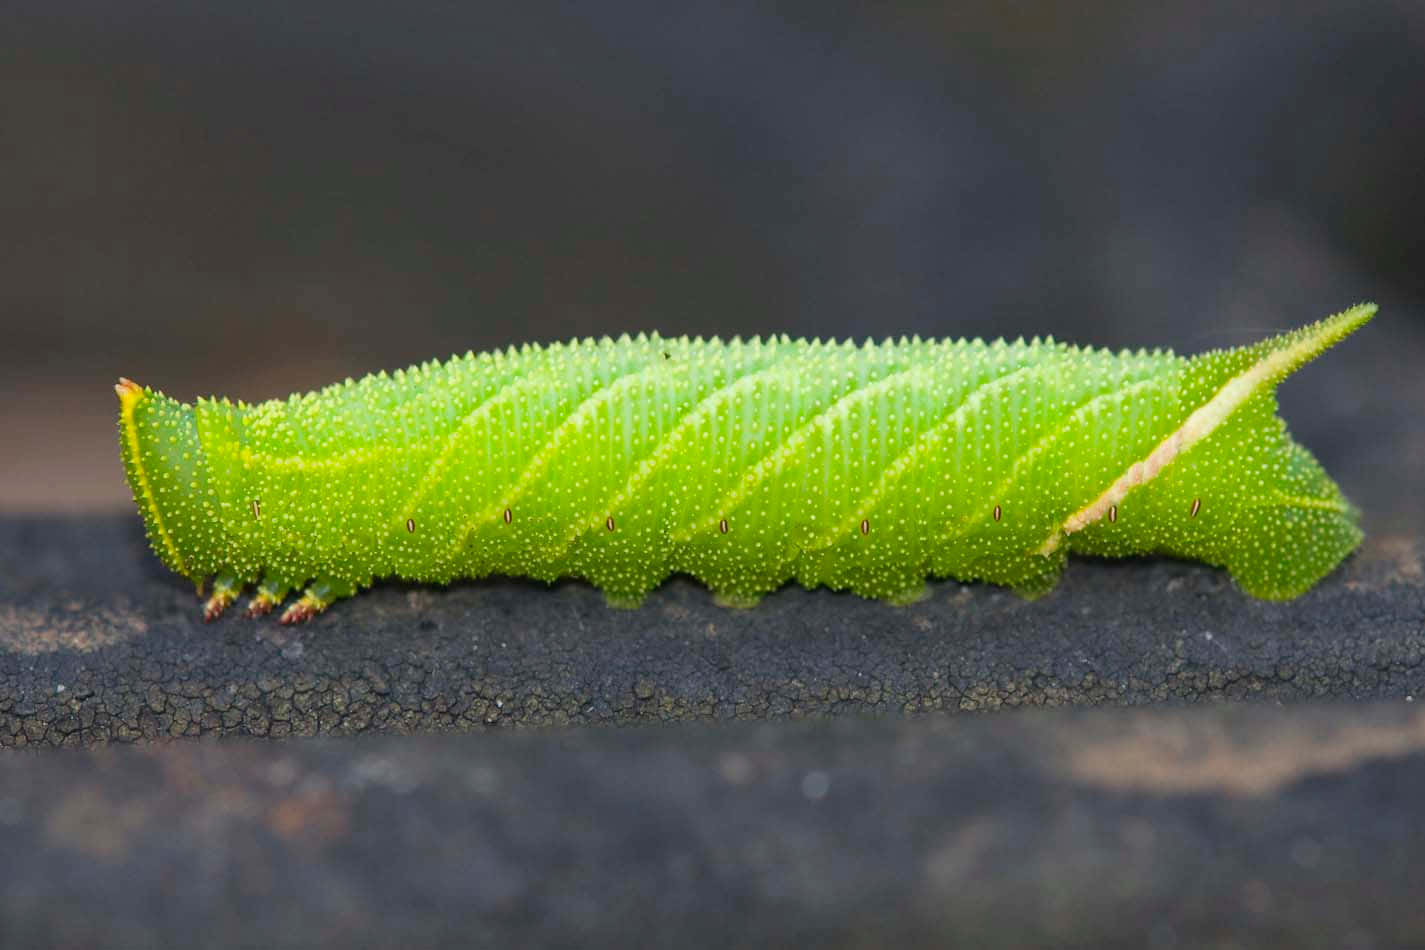 A Green Caterpillar Is Sitting On A Black Surface